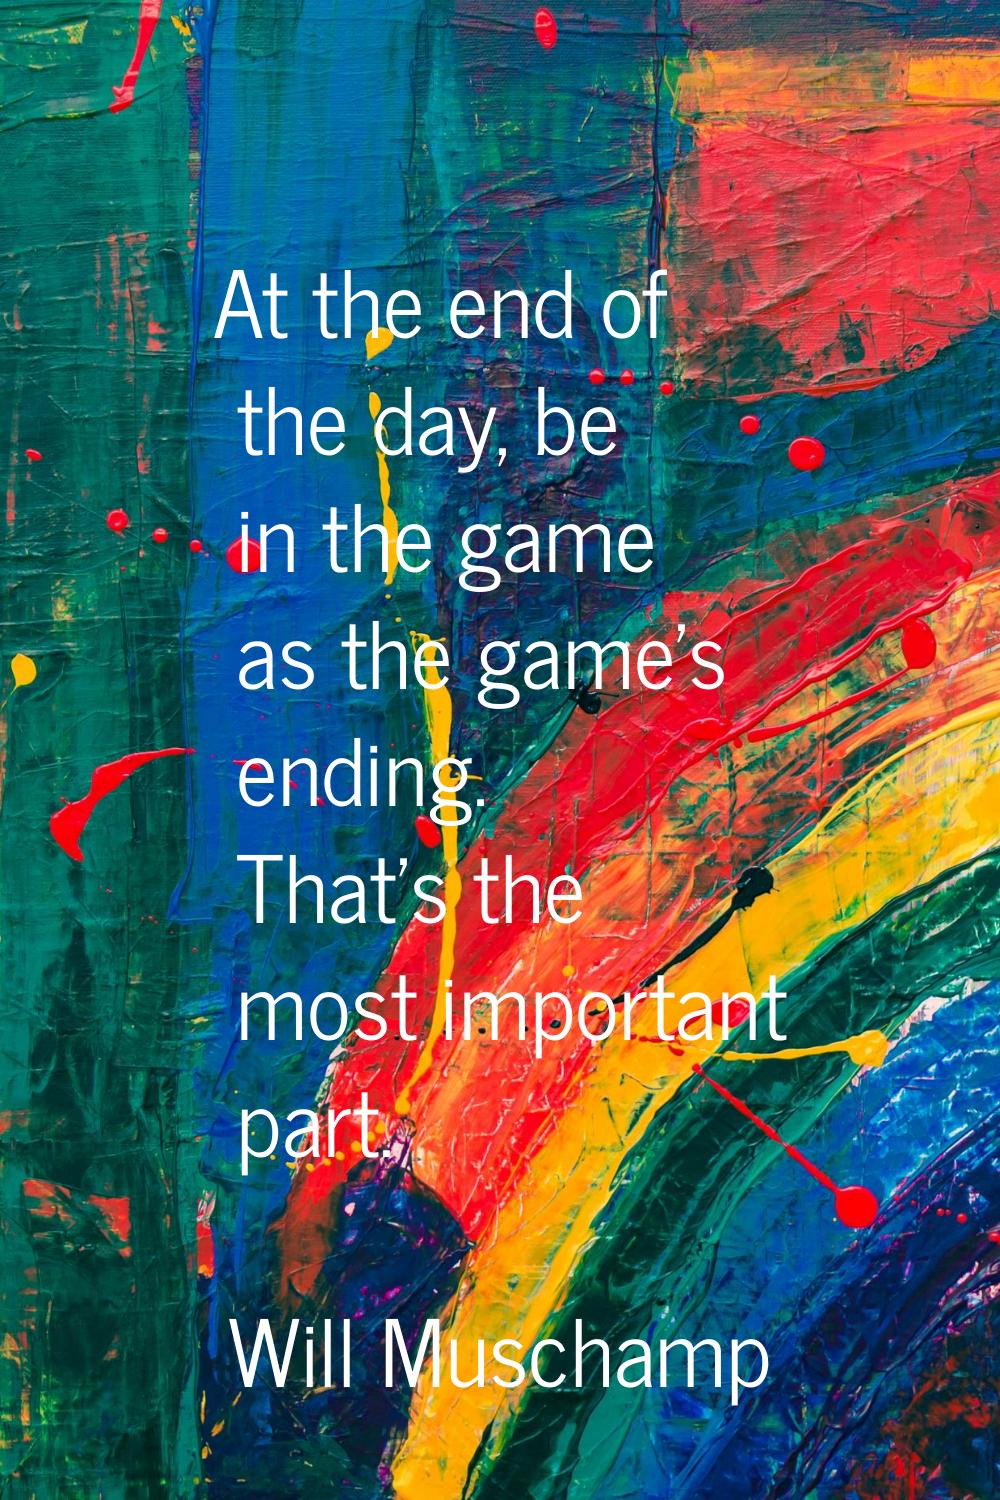 At the end of the day, be in the game as the game's ending. That's the most important part.